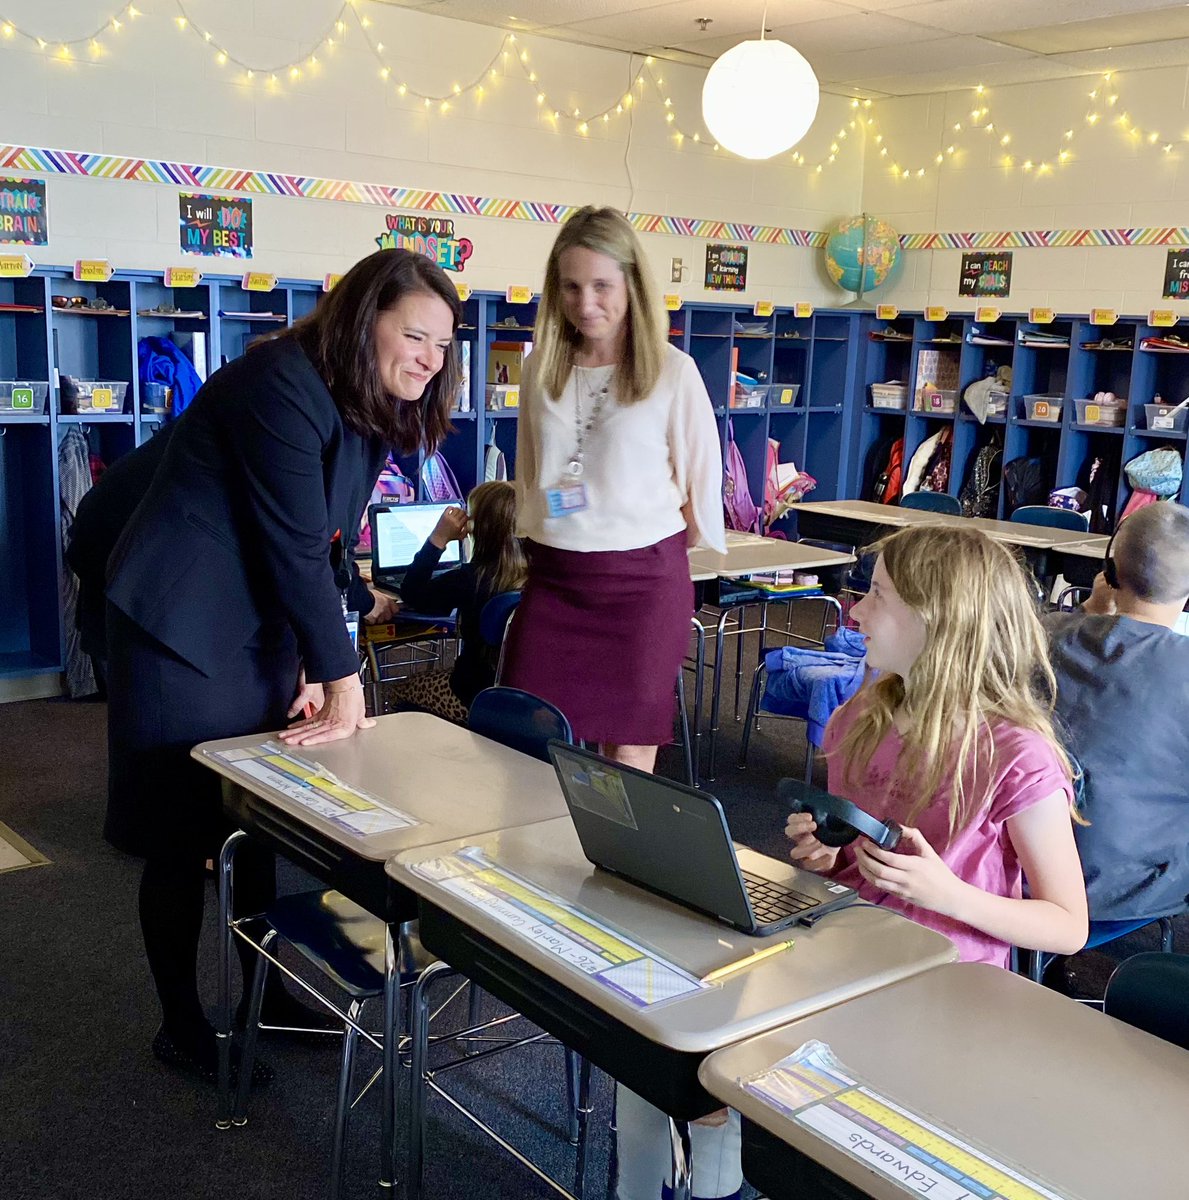 The essence of learning is personal which is why it's so important to connect with students at an individual level. With small group meetings and personal goals set for students, @MarysvilleEVSD is providing multiple literacy check-ins for their community of learners.